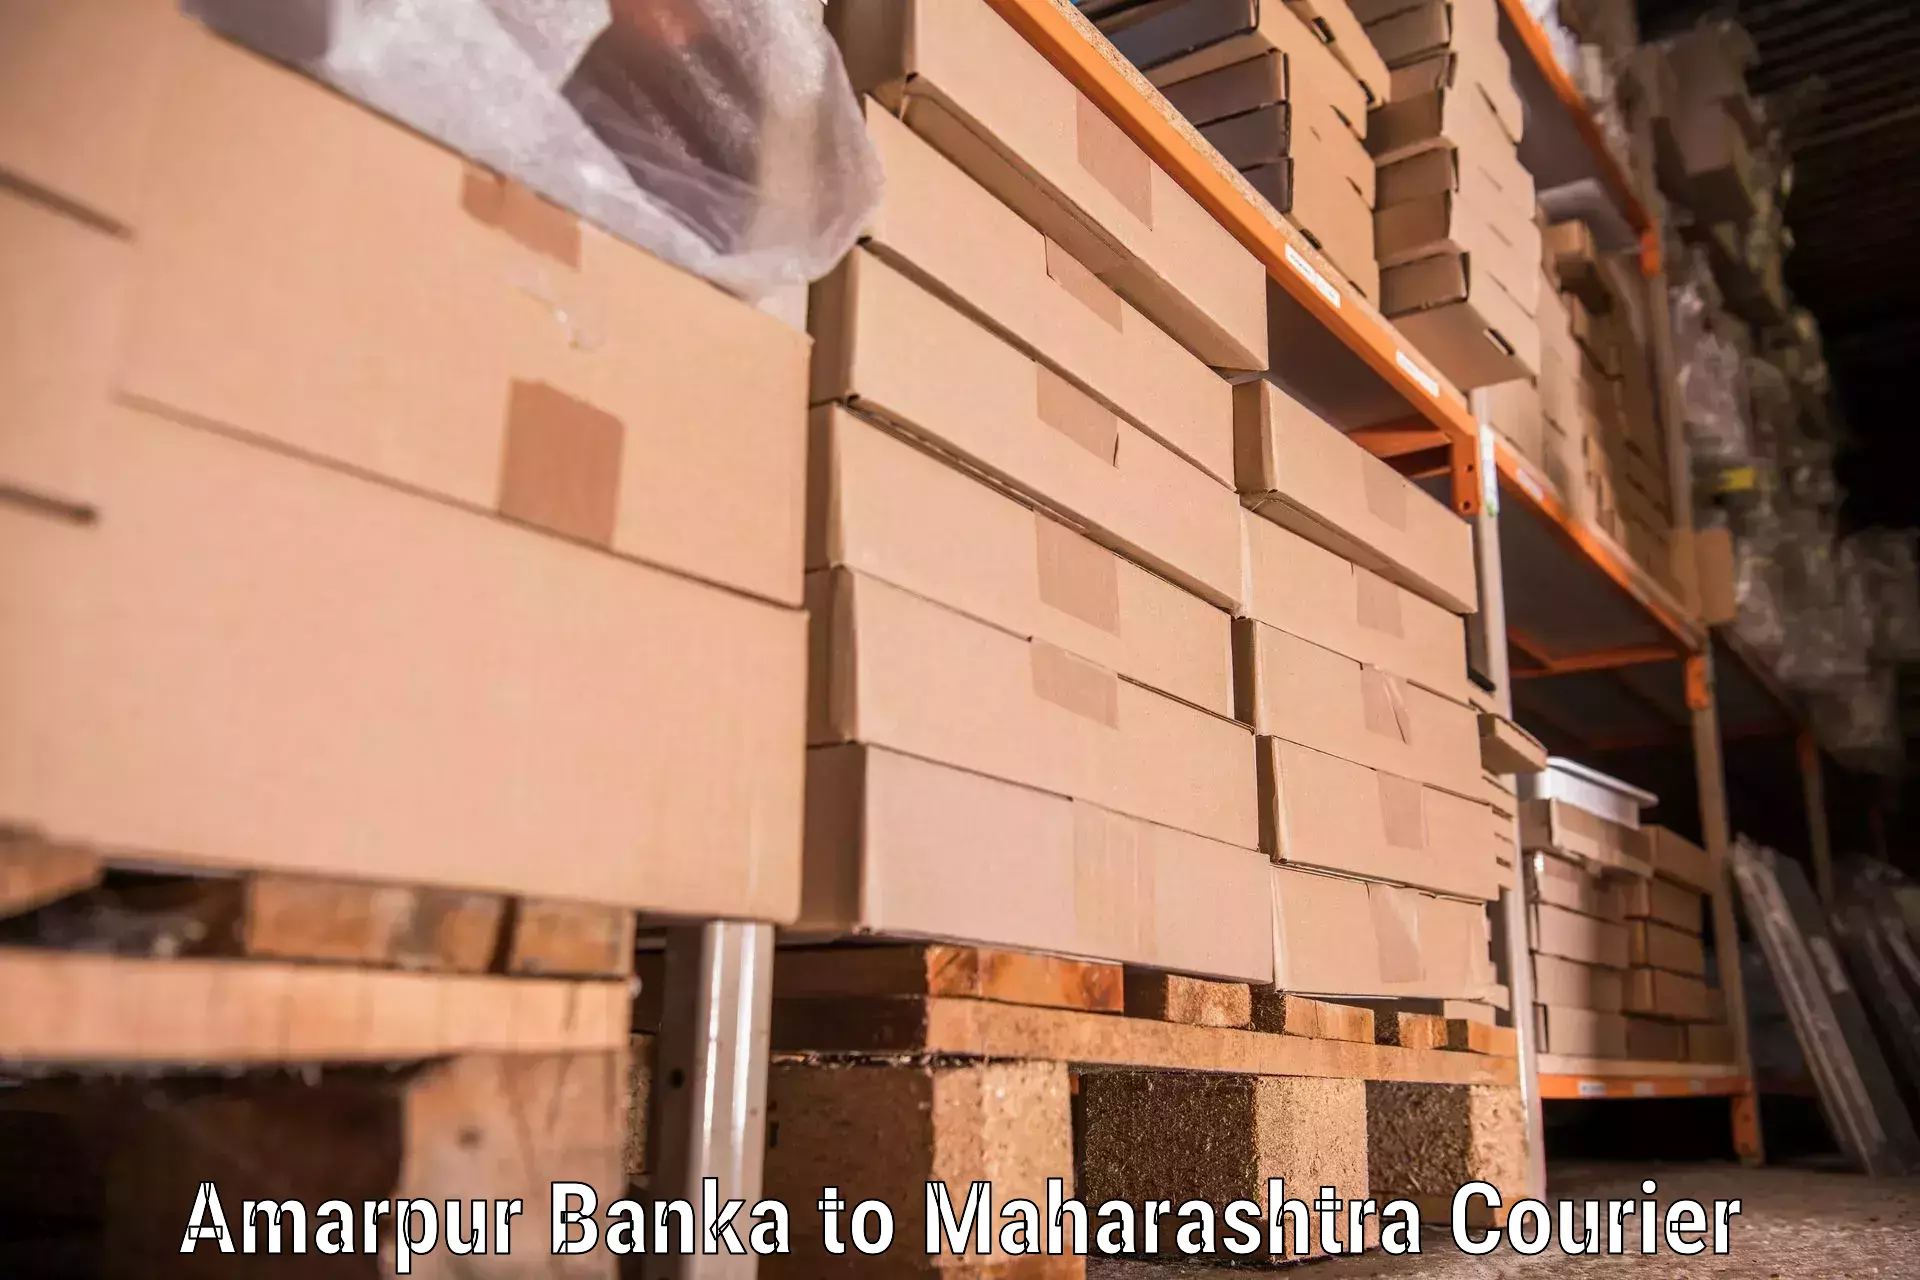 High-quality moving services in Amarpur Banka to Ahmednagar